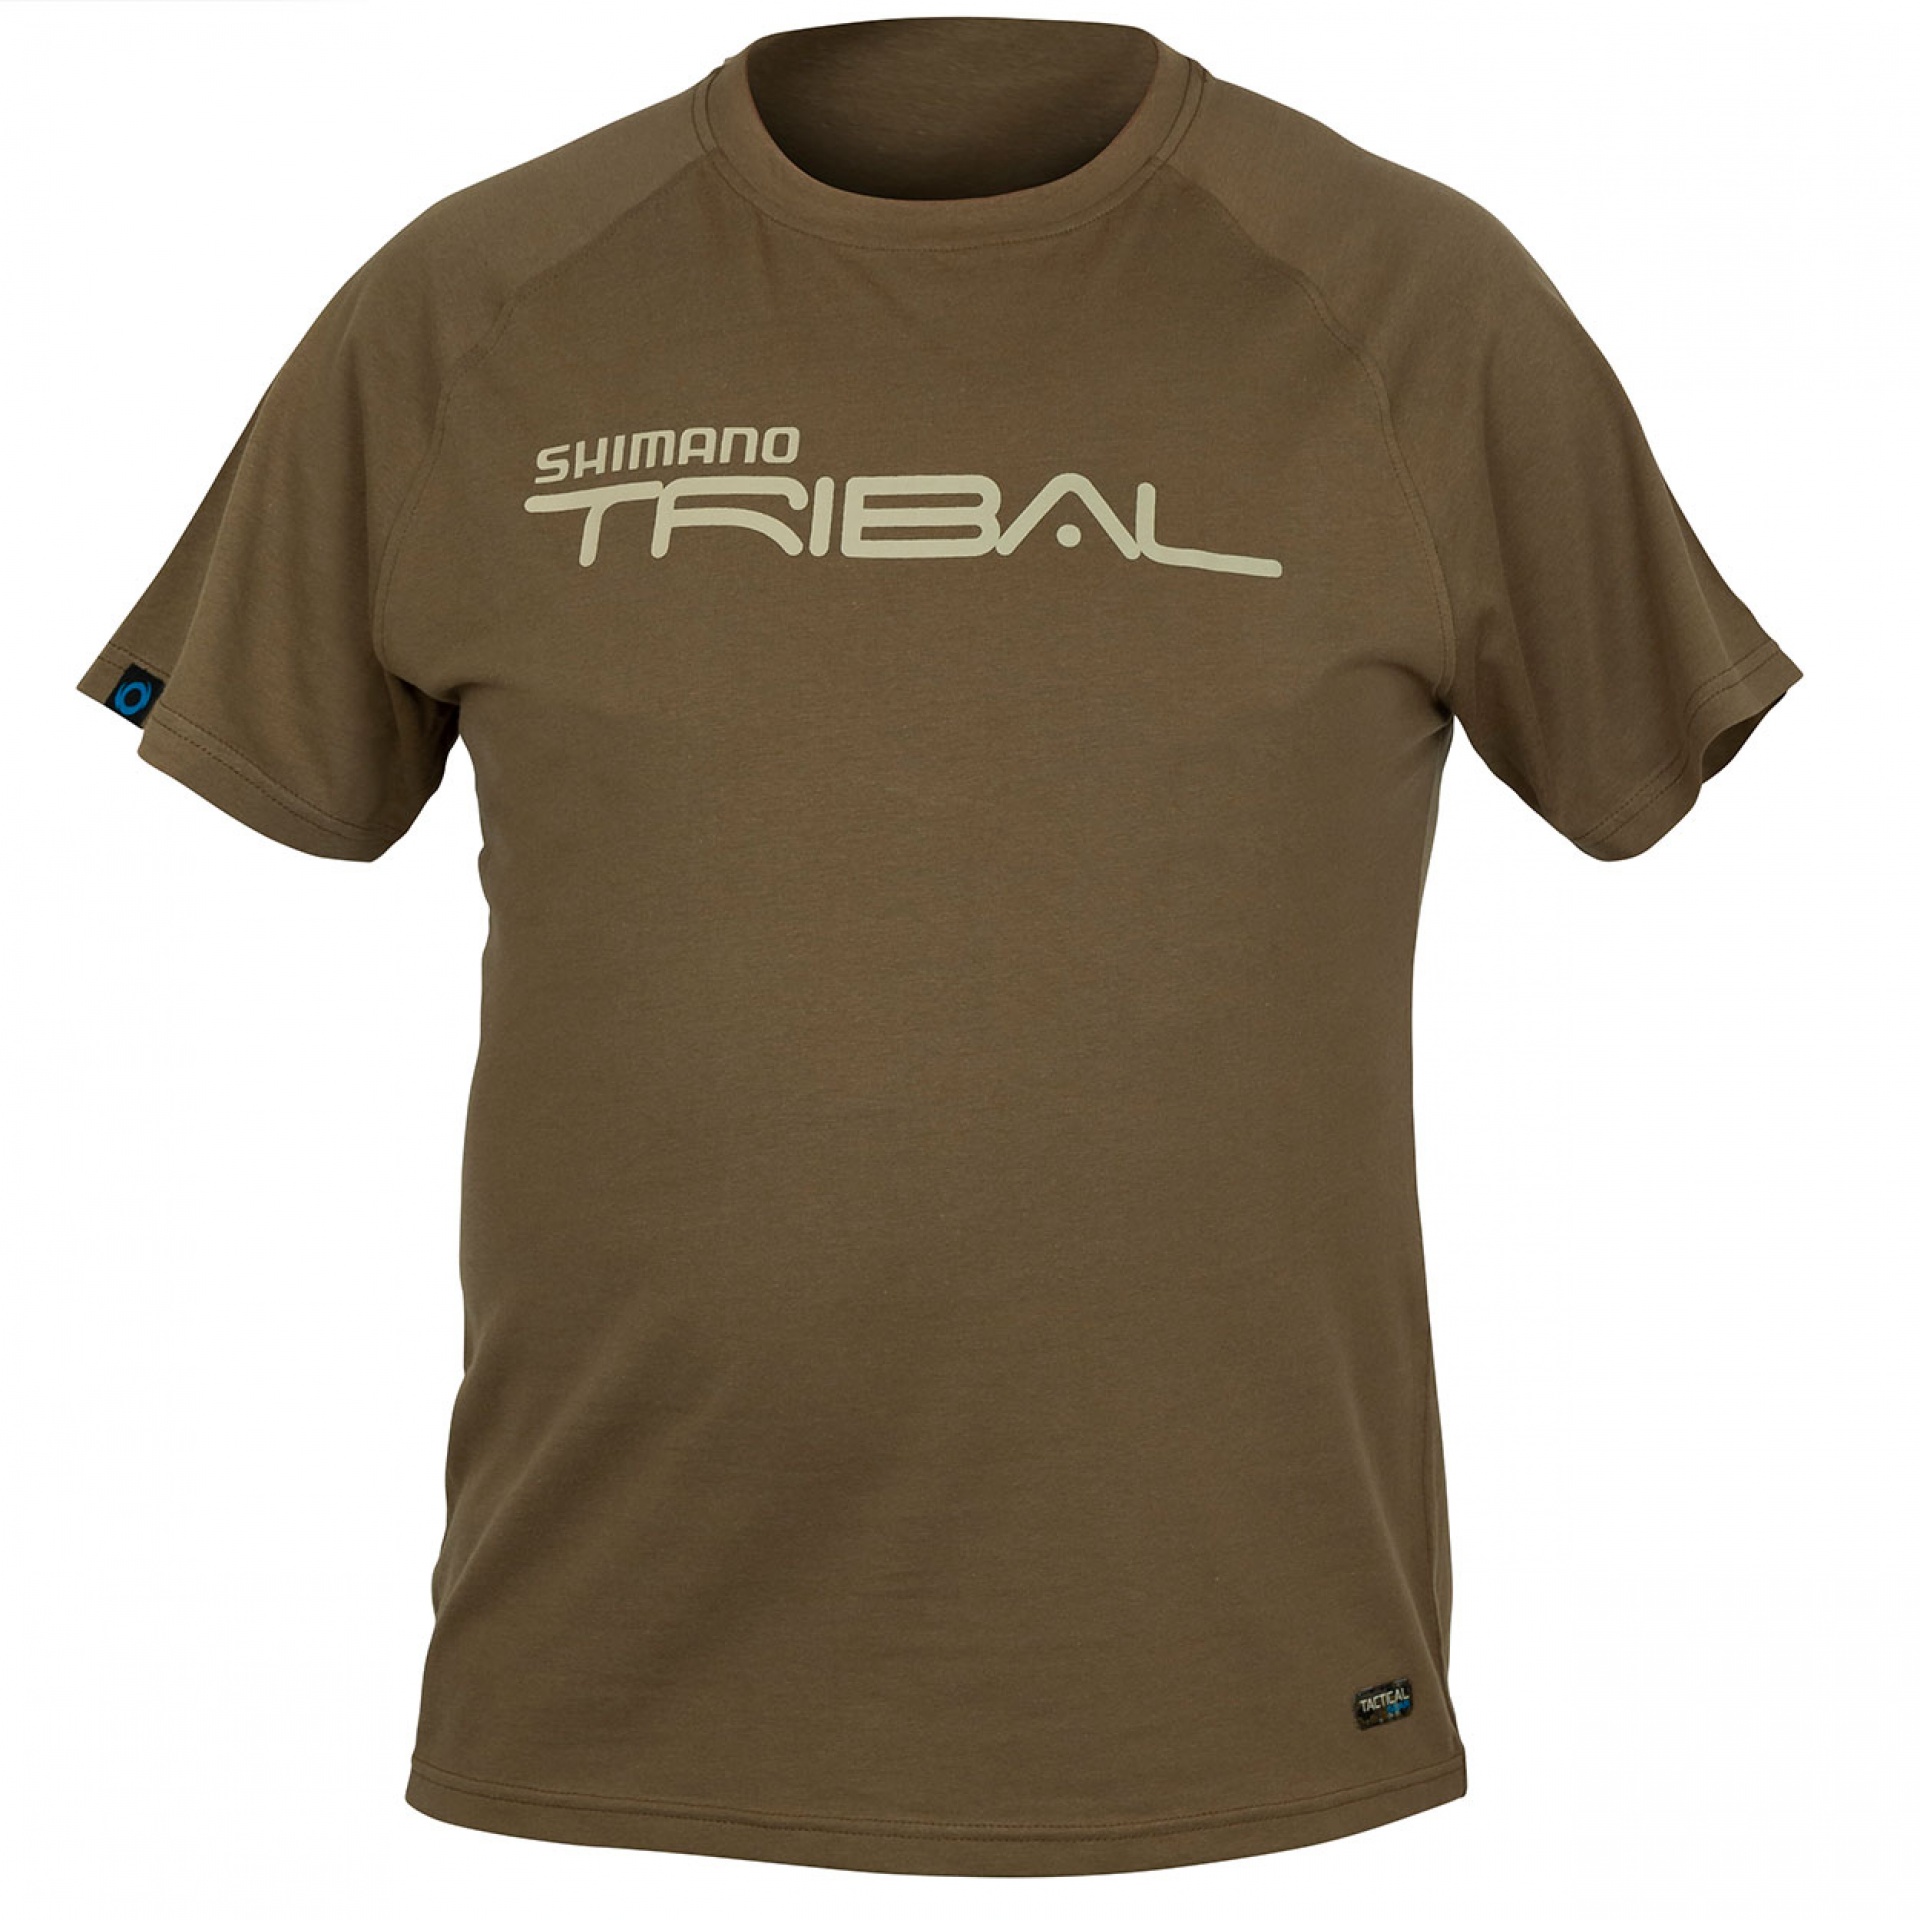 Shimano Tribal Tactical Wear T-Shirt Olive